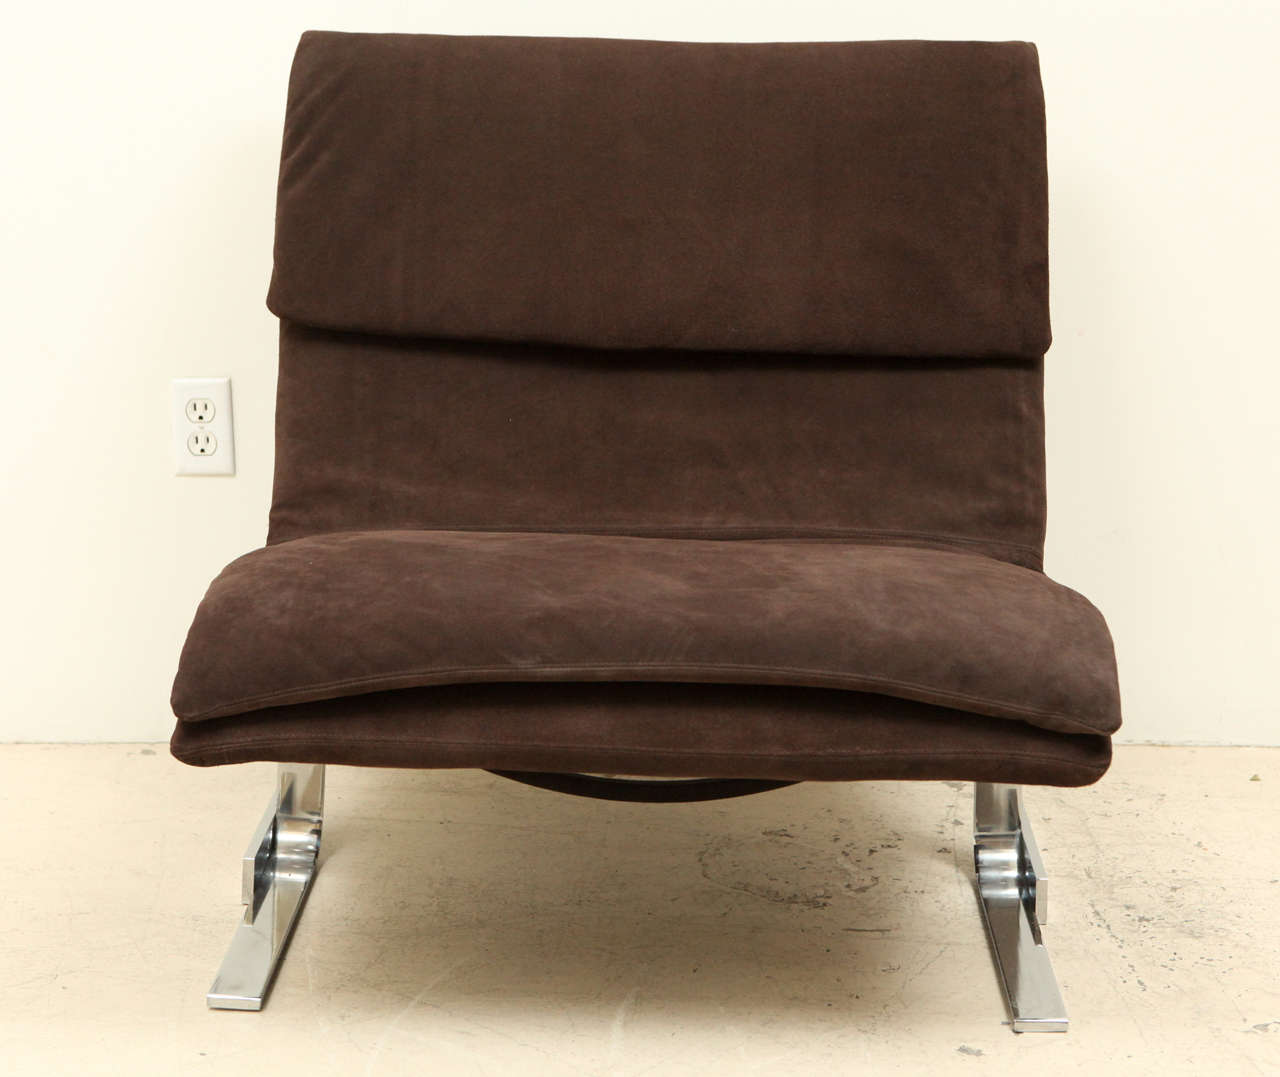 Pair of Onda Lounge Chairs from Saporiti Italia by Giovanni Offredi.
Chairs in chrome and brown suede.